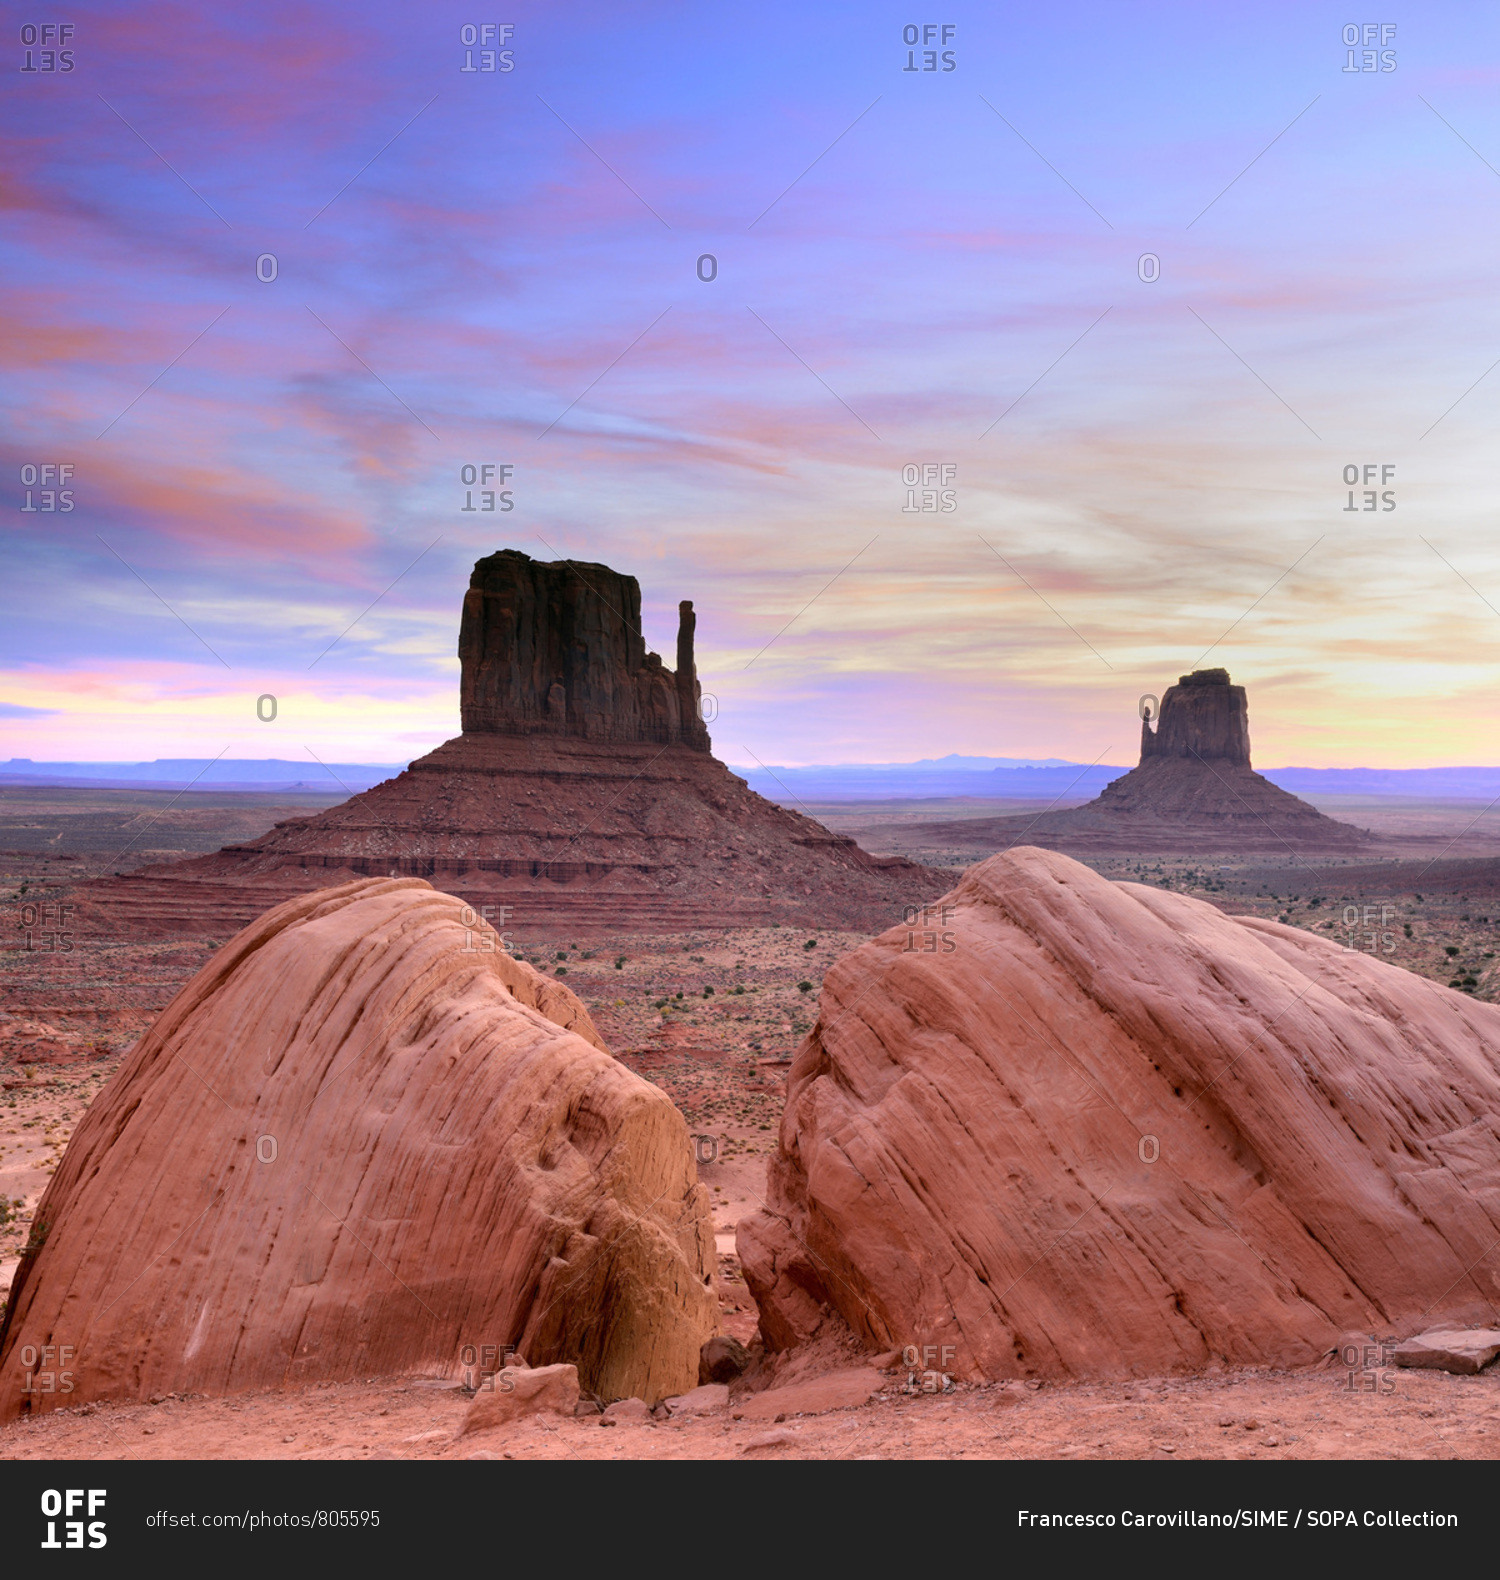 United States, Arizona, Monument Valley Tribal Park, Monument Valley, The View Area